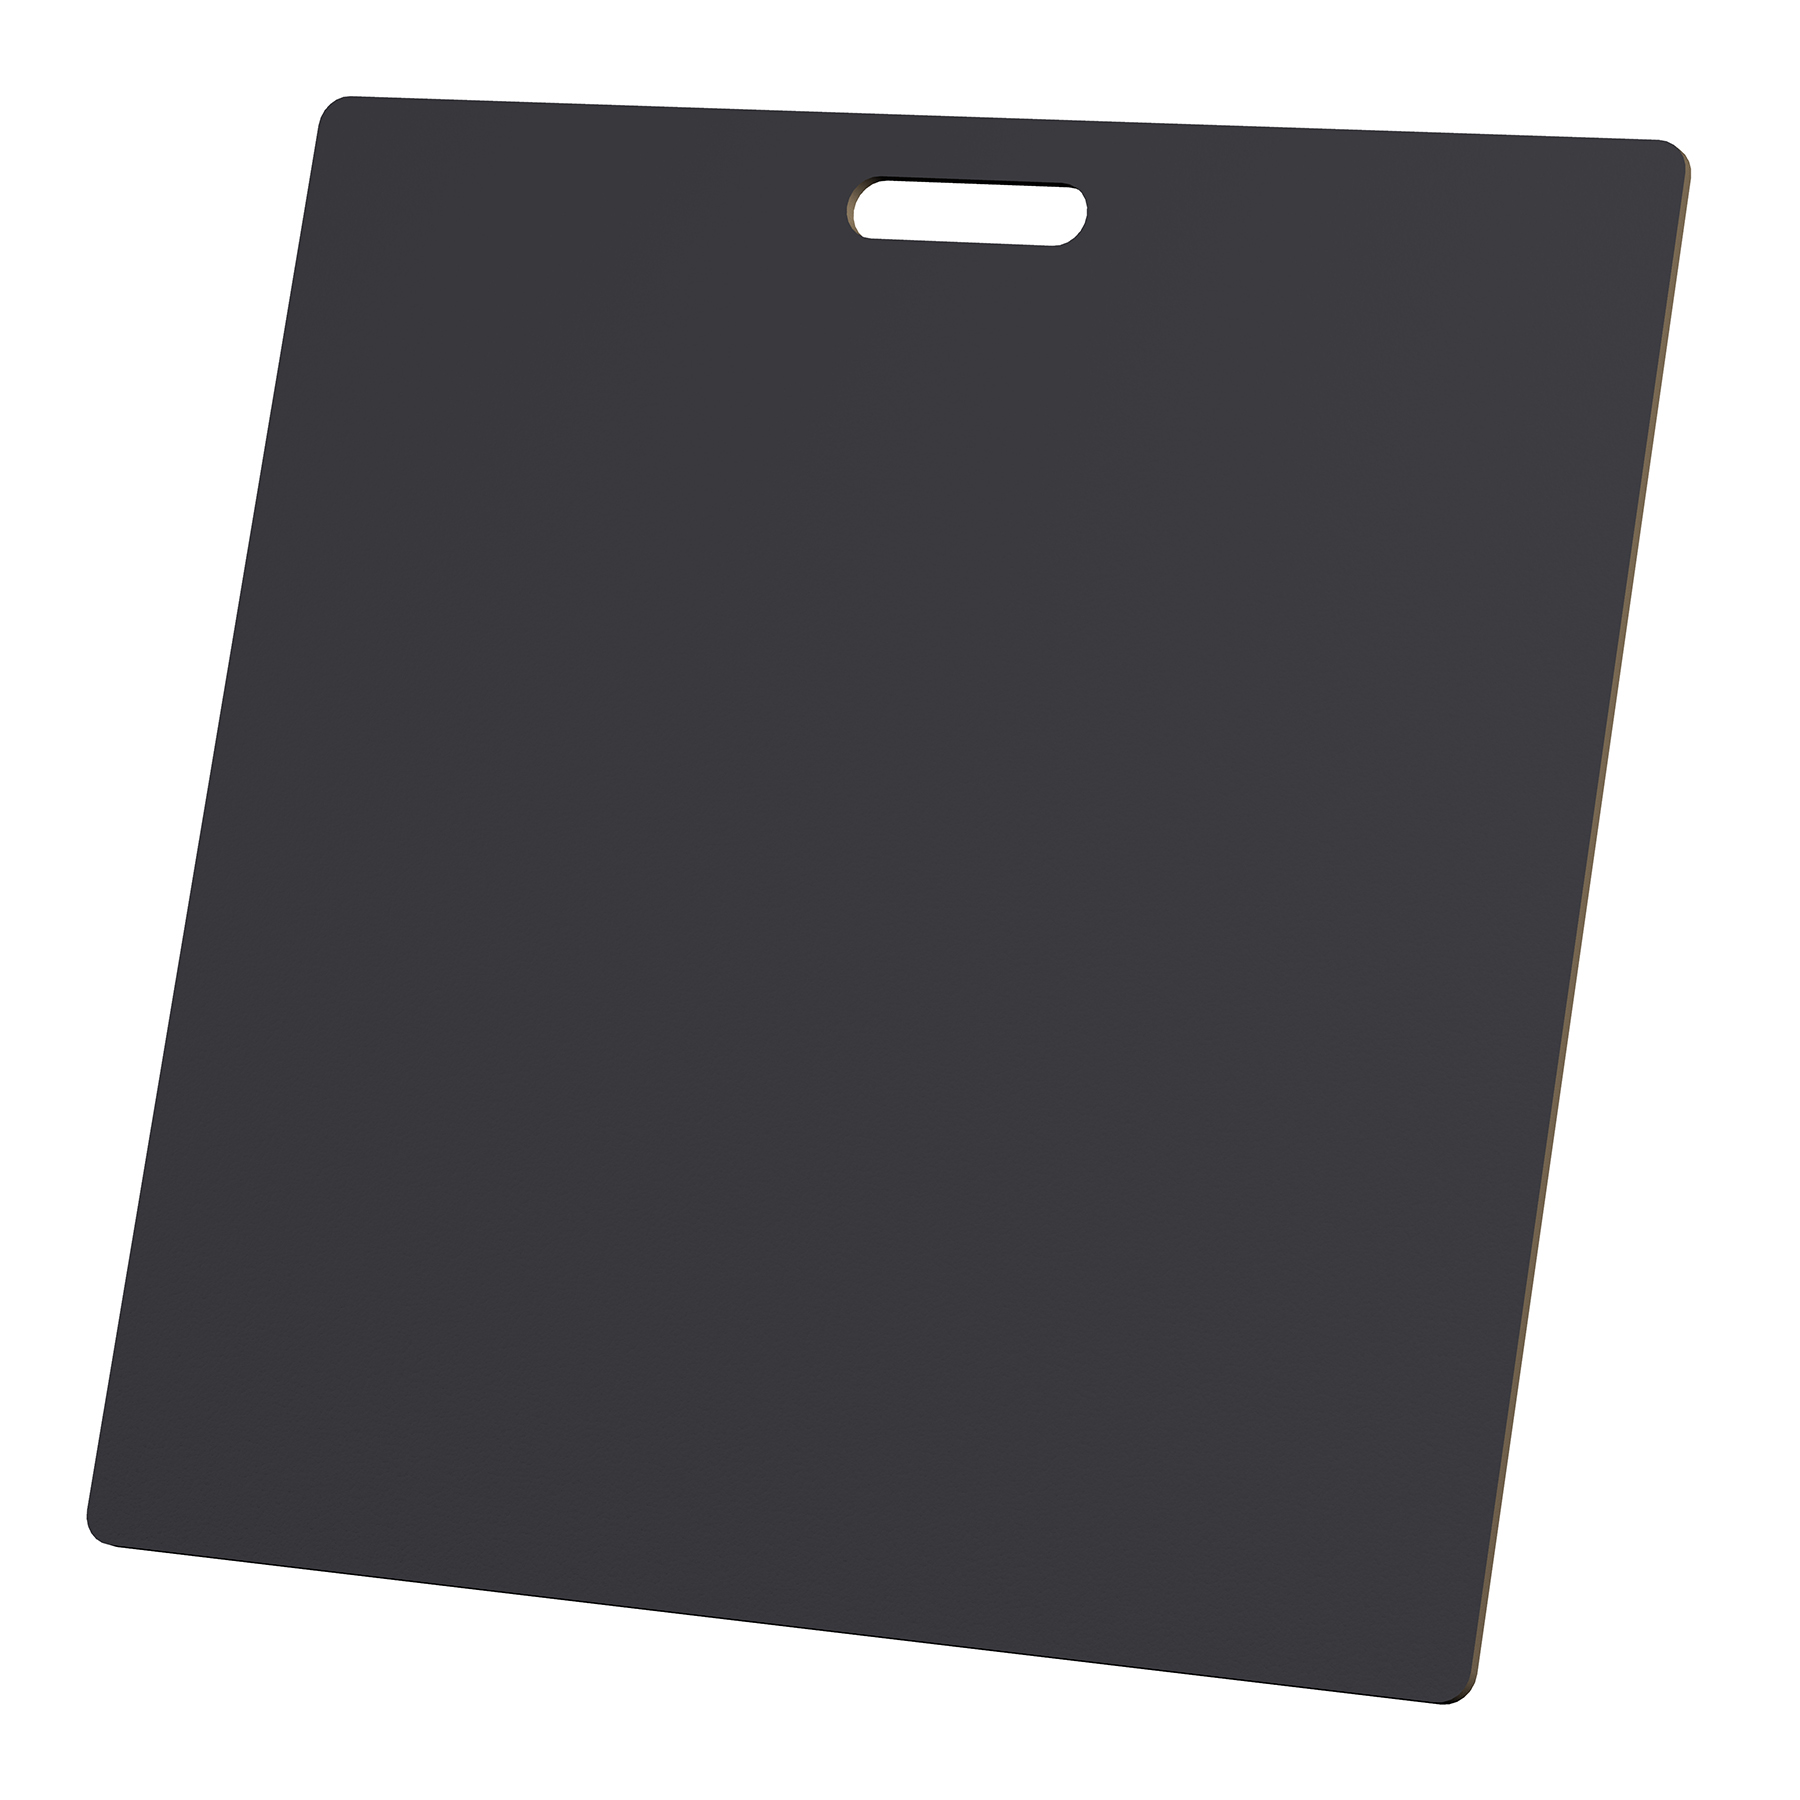 23.5 inch x 23.5 inch Black Sample Display Board for Tile Flooring Stone Wood